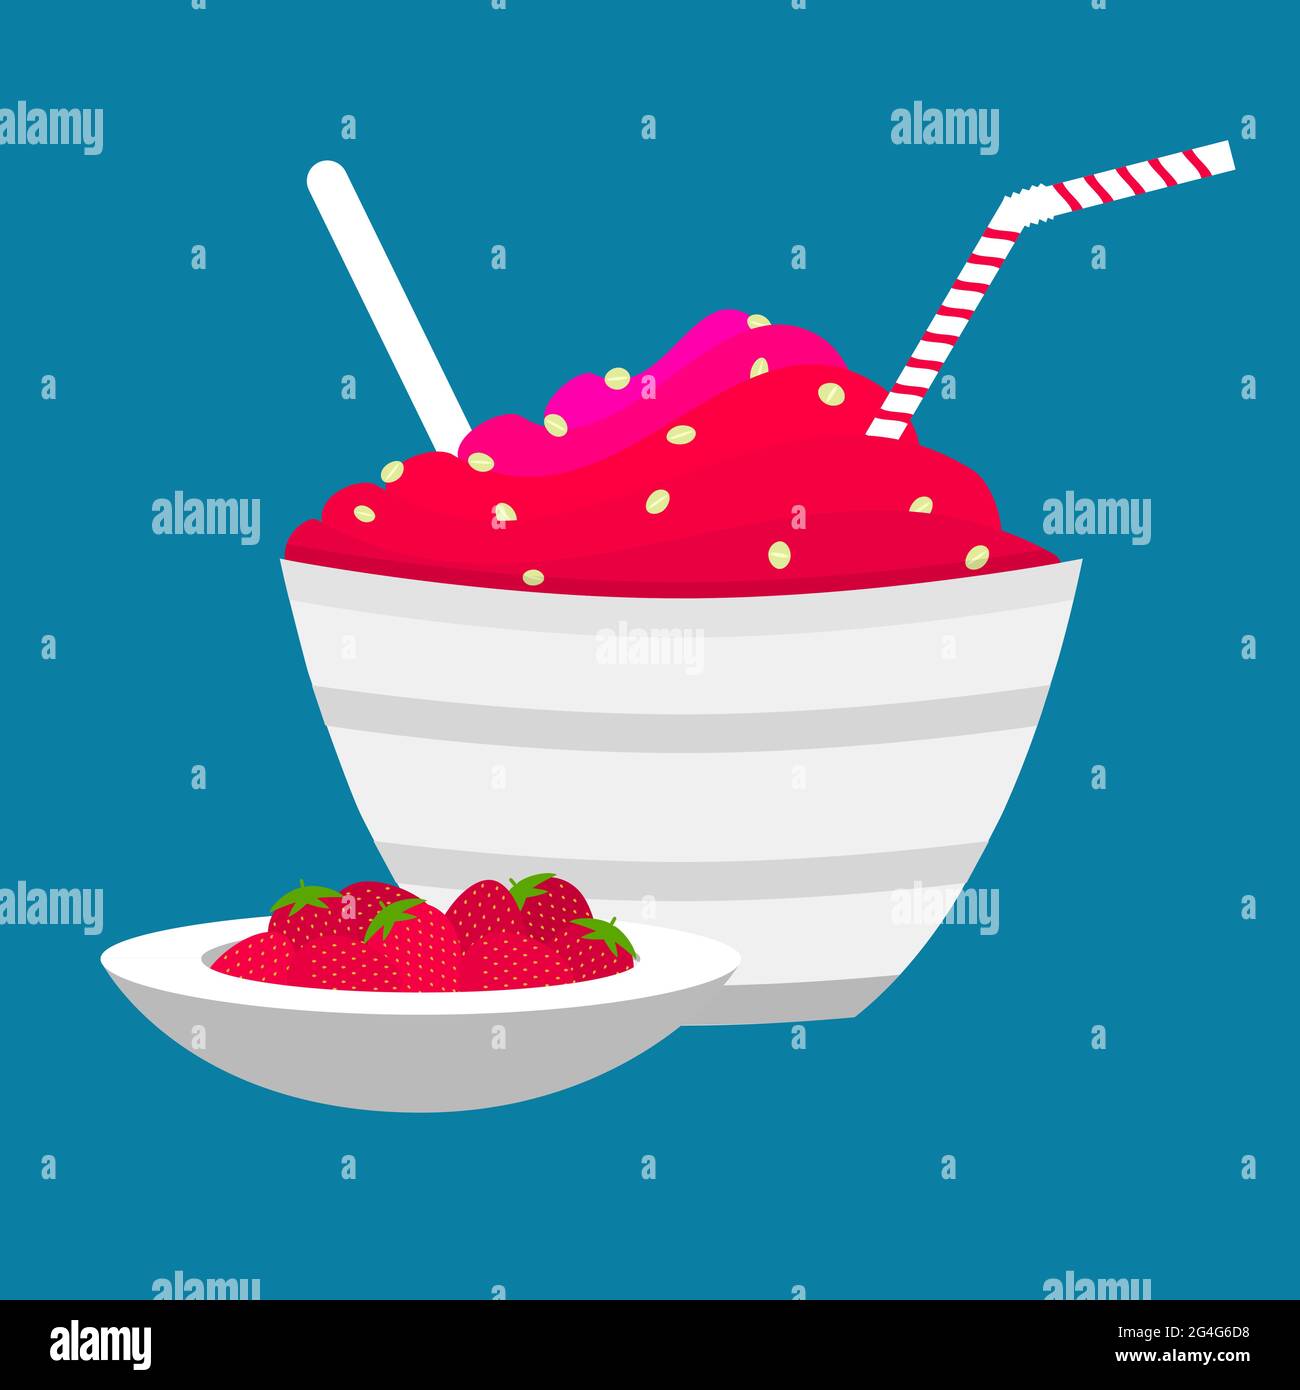 Bowl of strawberry cream with oat flakes. Beside, bowl of fresh strawberries as a side dish. Stock Vector